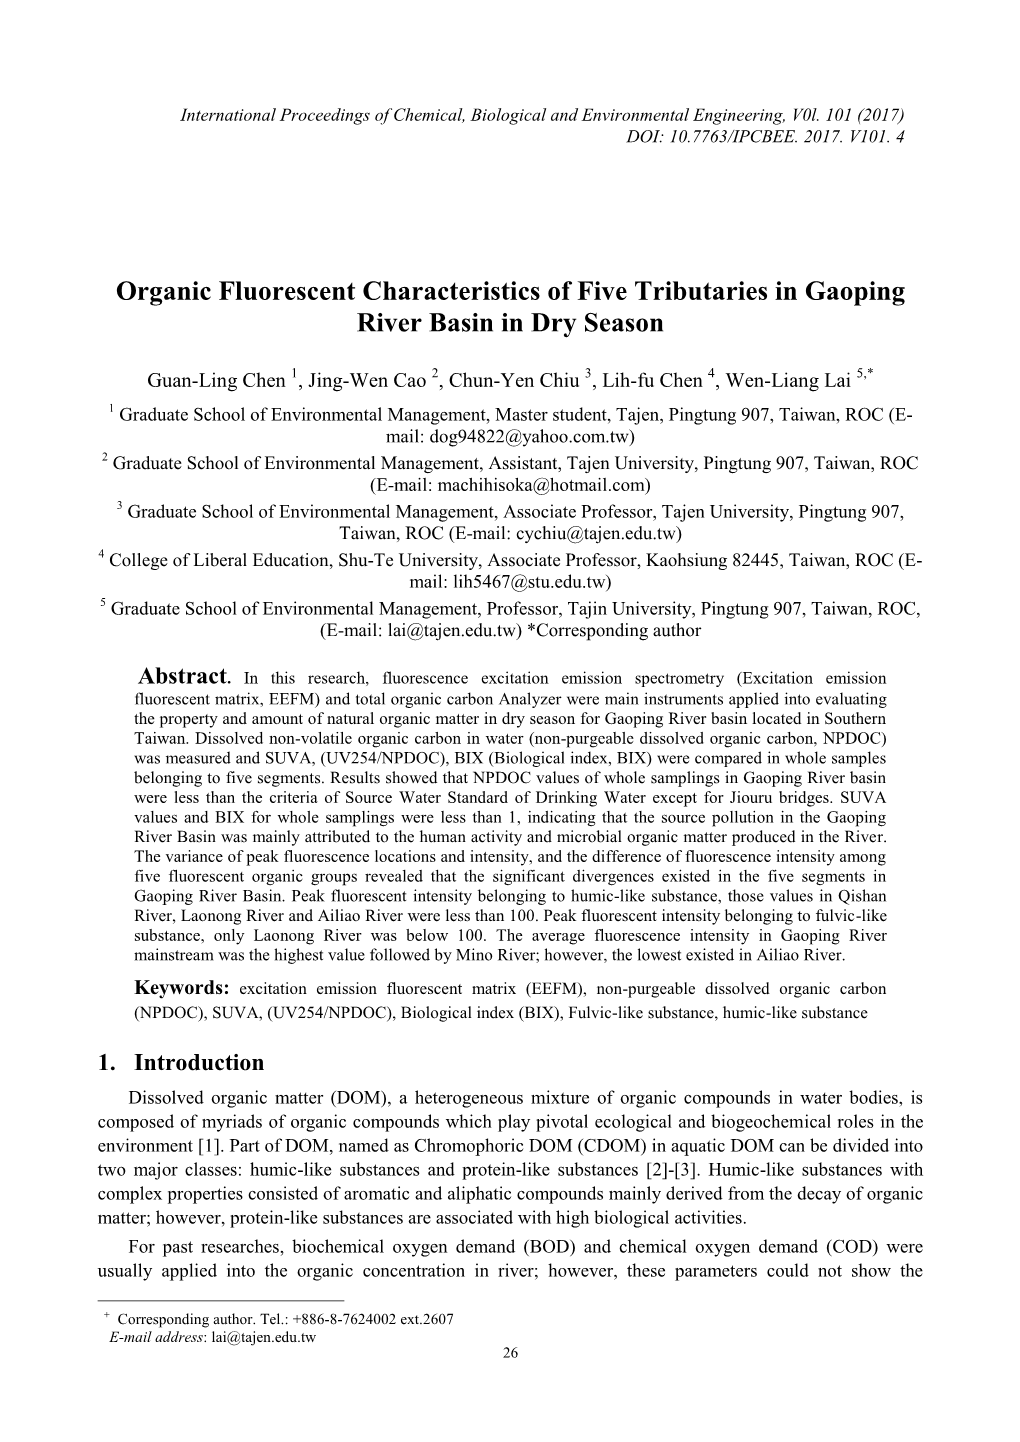 Organic Fluorescent Characteristics of Five Tributaries in Gaoping River Basin in Dry Season